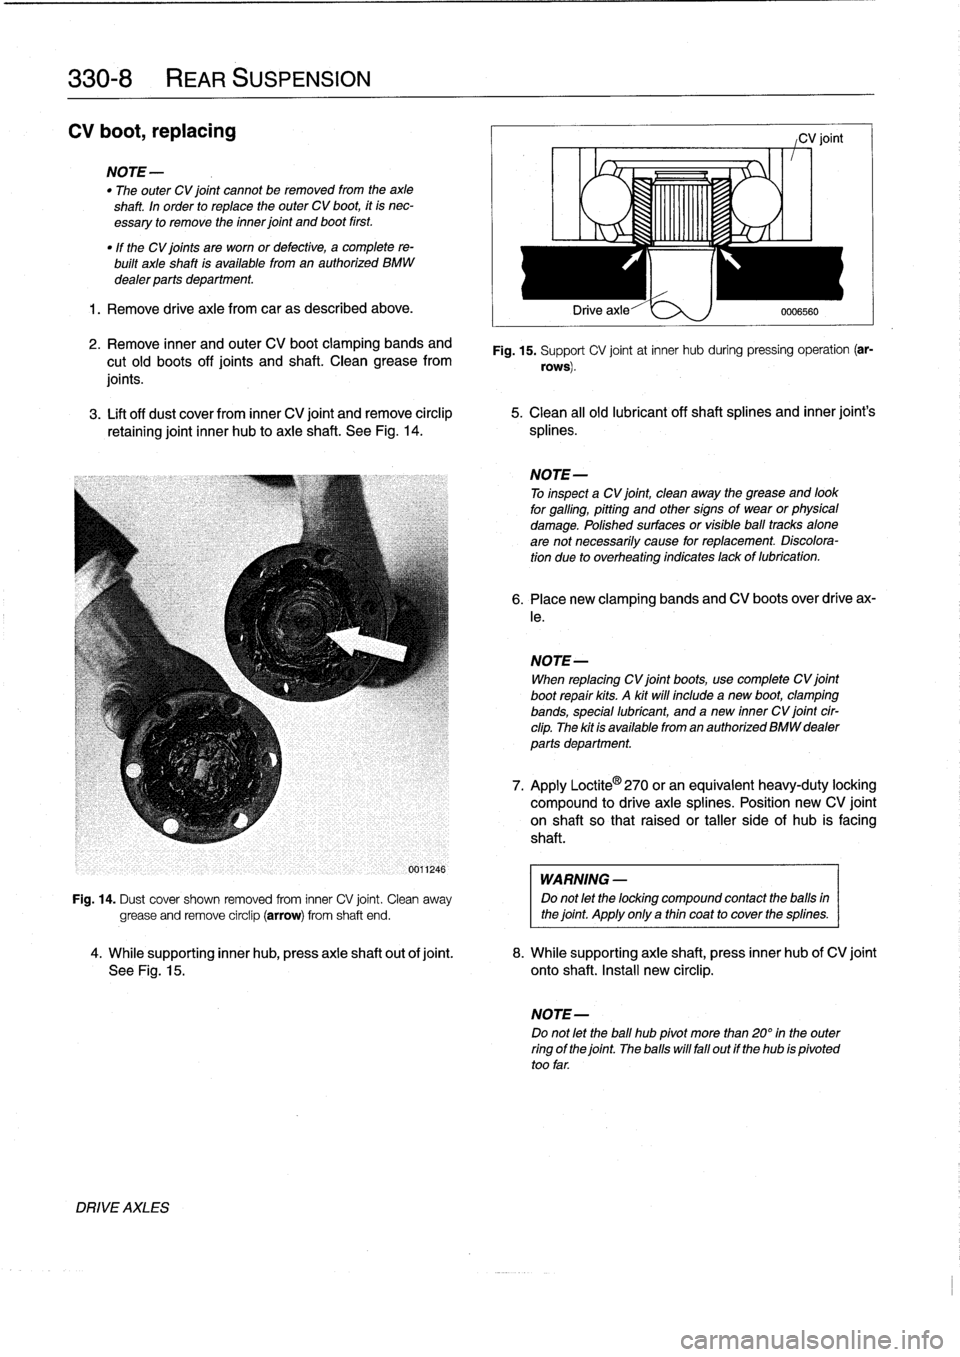 BMW 328i 1993 E36 Service Manual 
330-
8

	

REAR
SUSPENSION

CV
boot,
replacing

NOTE-

"
The
outer
CV
joint
cannot
be
removed
from
the
axle
shaft
.
In
order
to
replace
the
outer
CV
boot,
it
is
nec-
essary
to
remove
the
inner
joint
